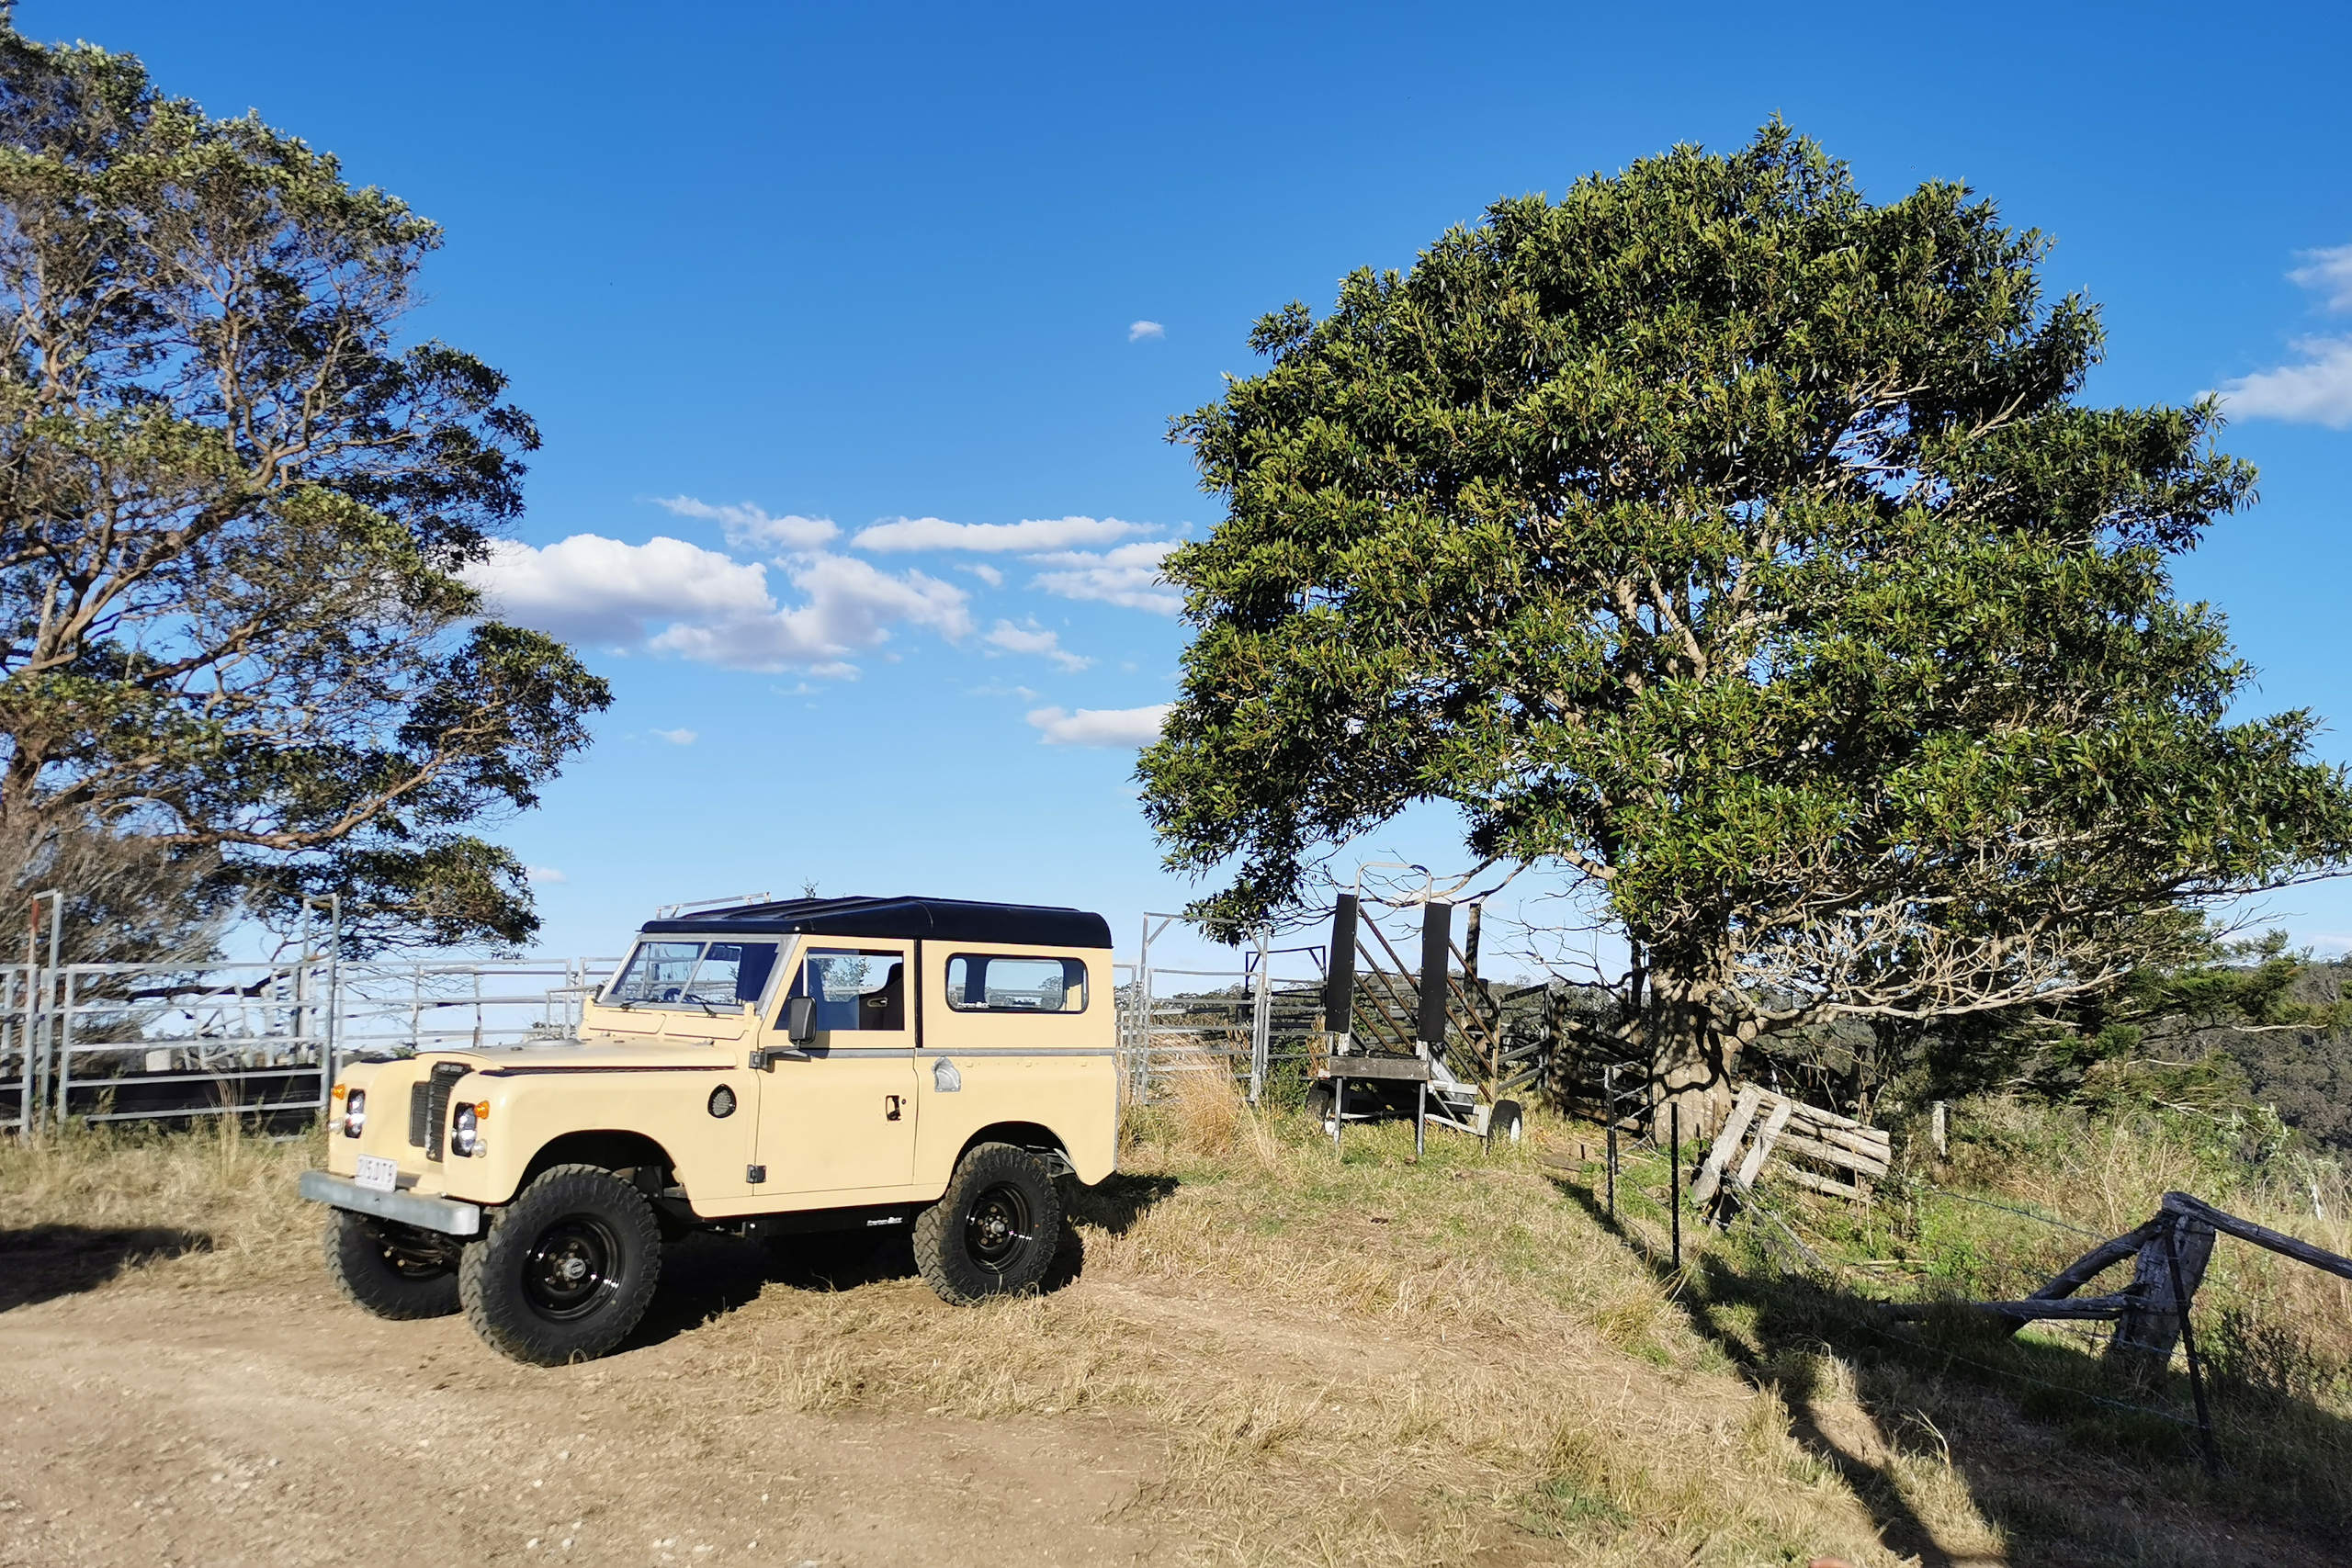 The electric 1973 Series 2 Land Rover at a scenic spot during a 4WD adventure.